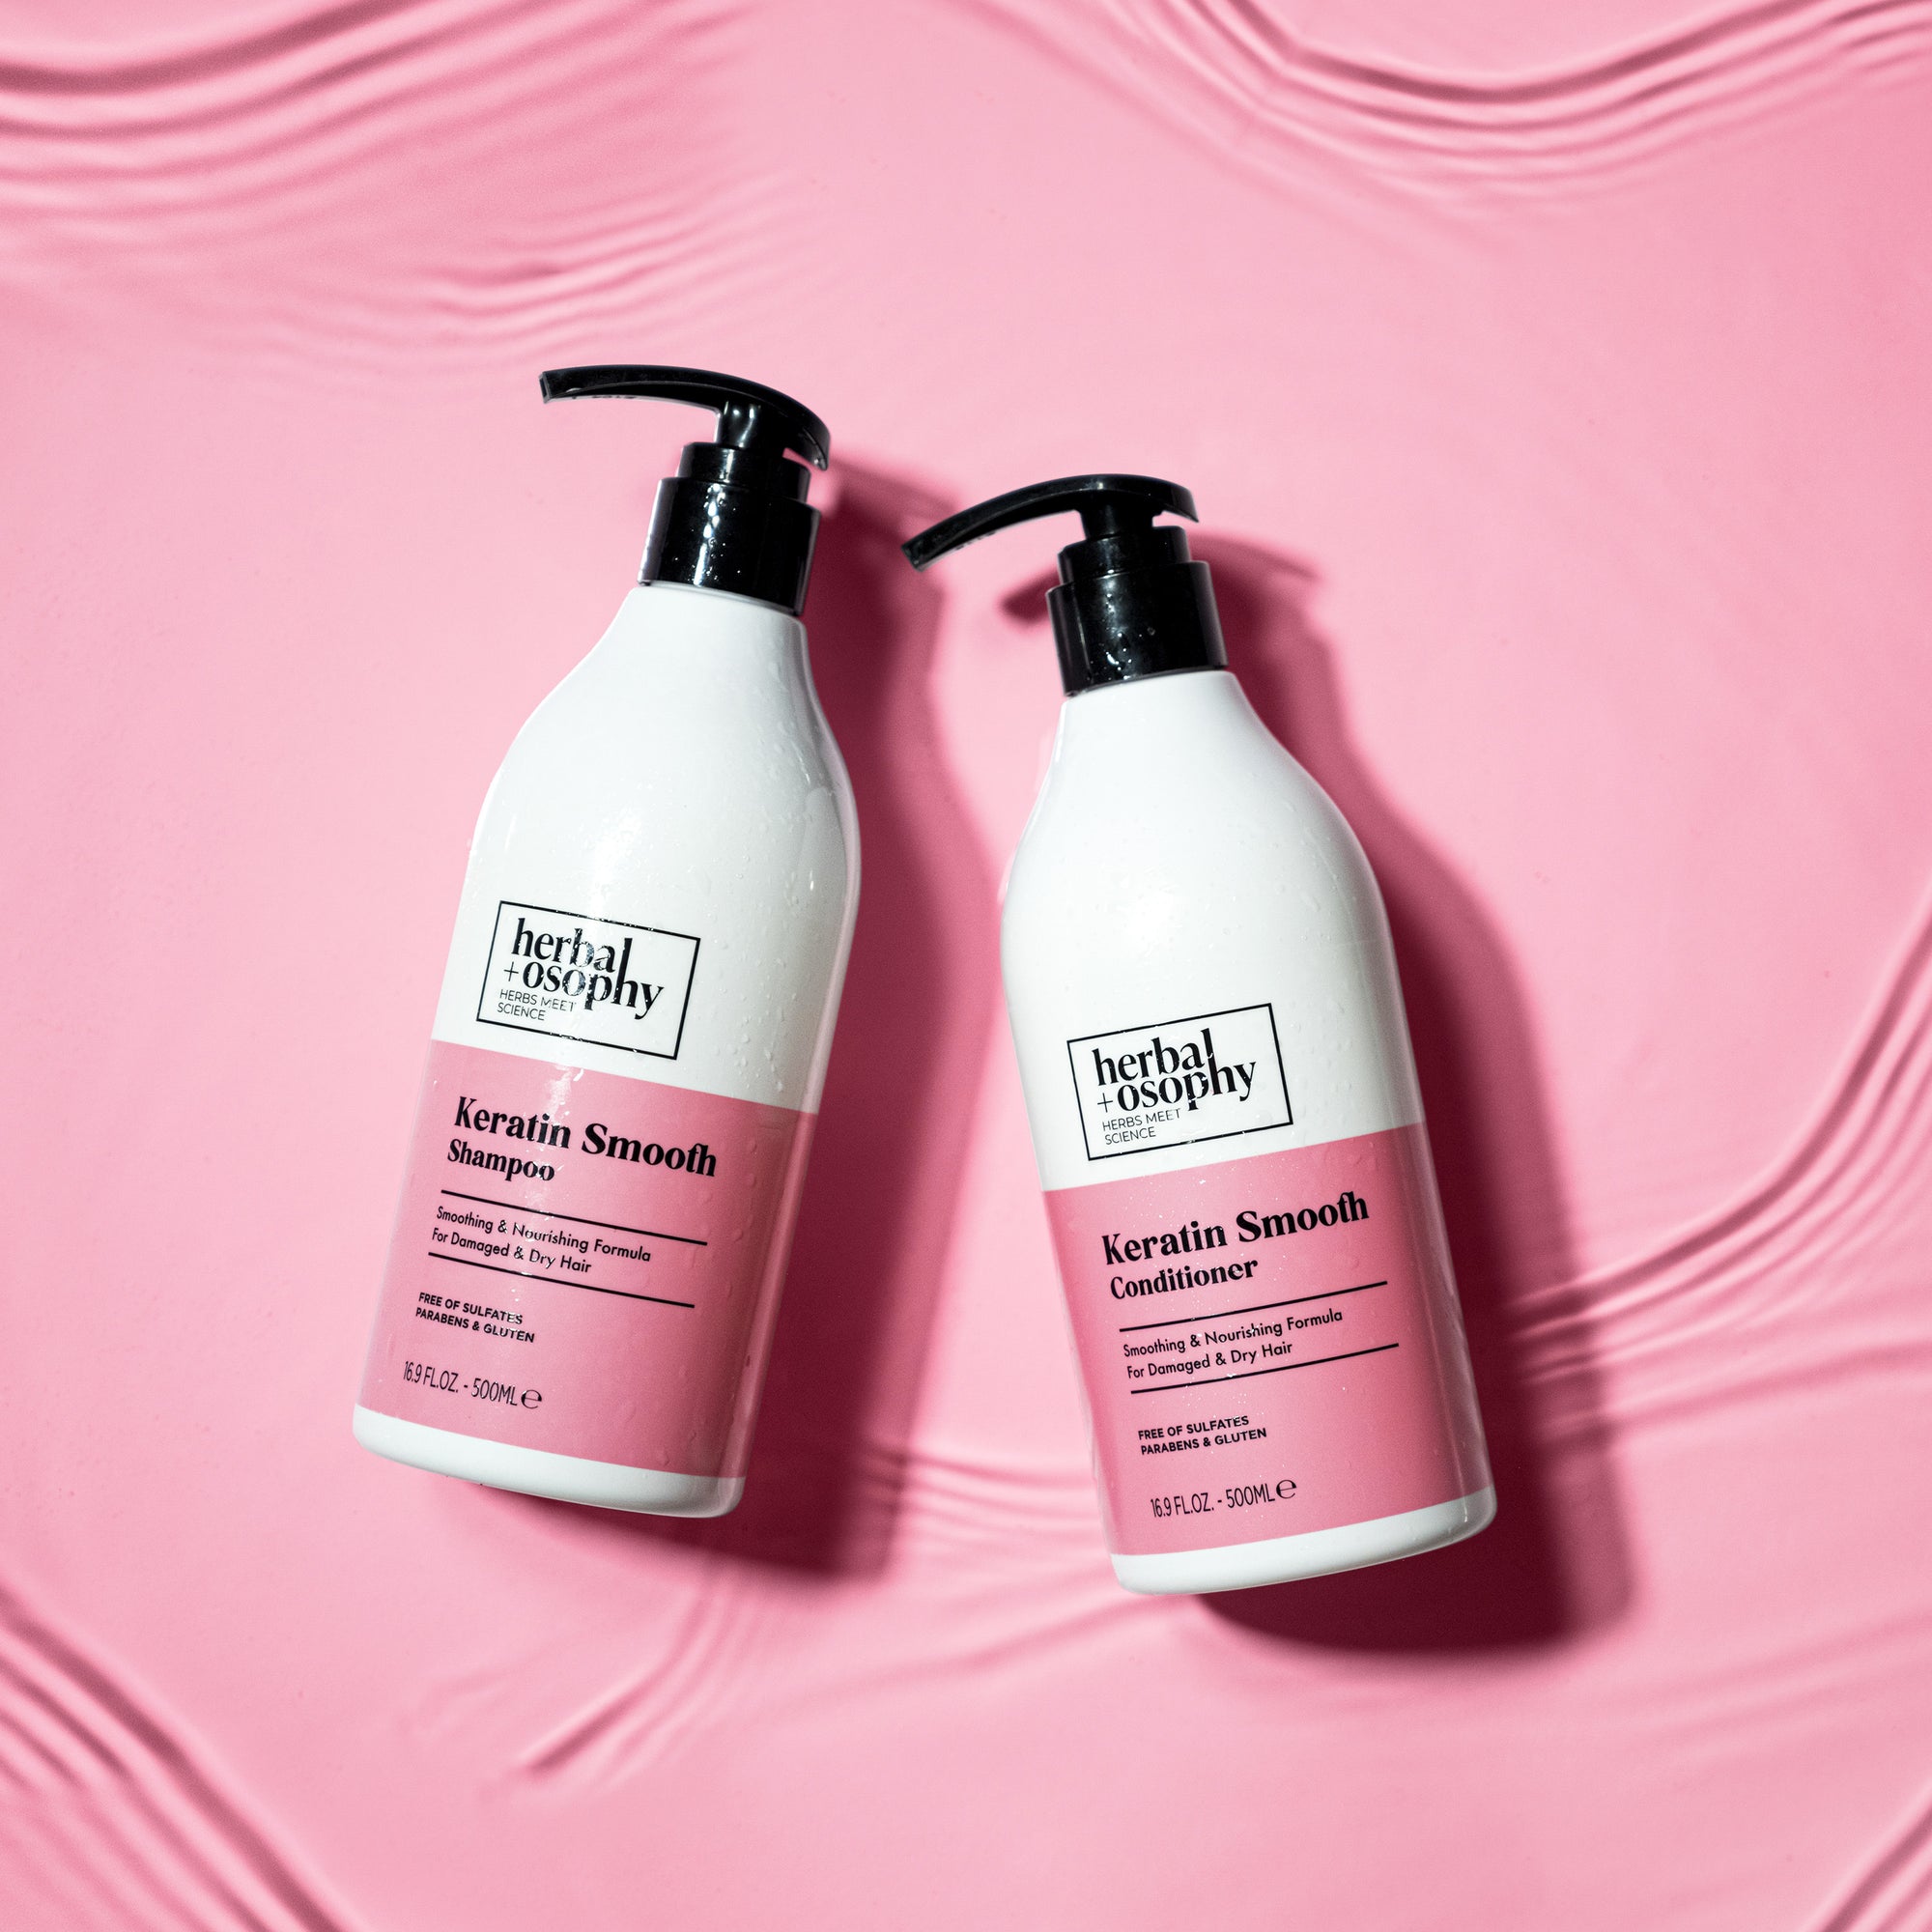 Herbalosophy Keratin Smooth Shampoo and Conditioner bottles in pink rippling water